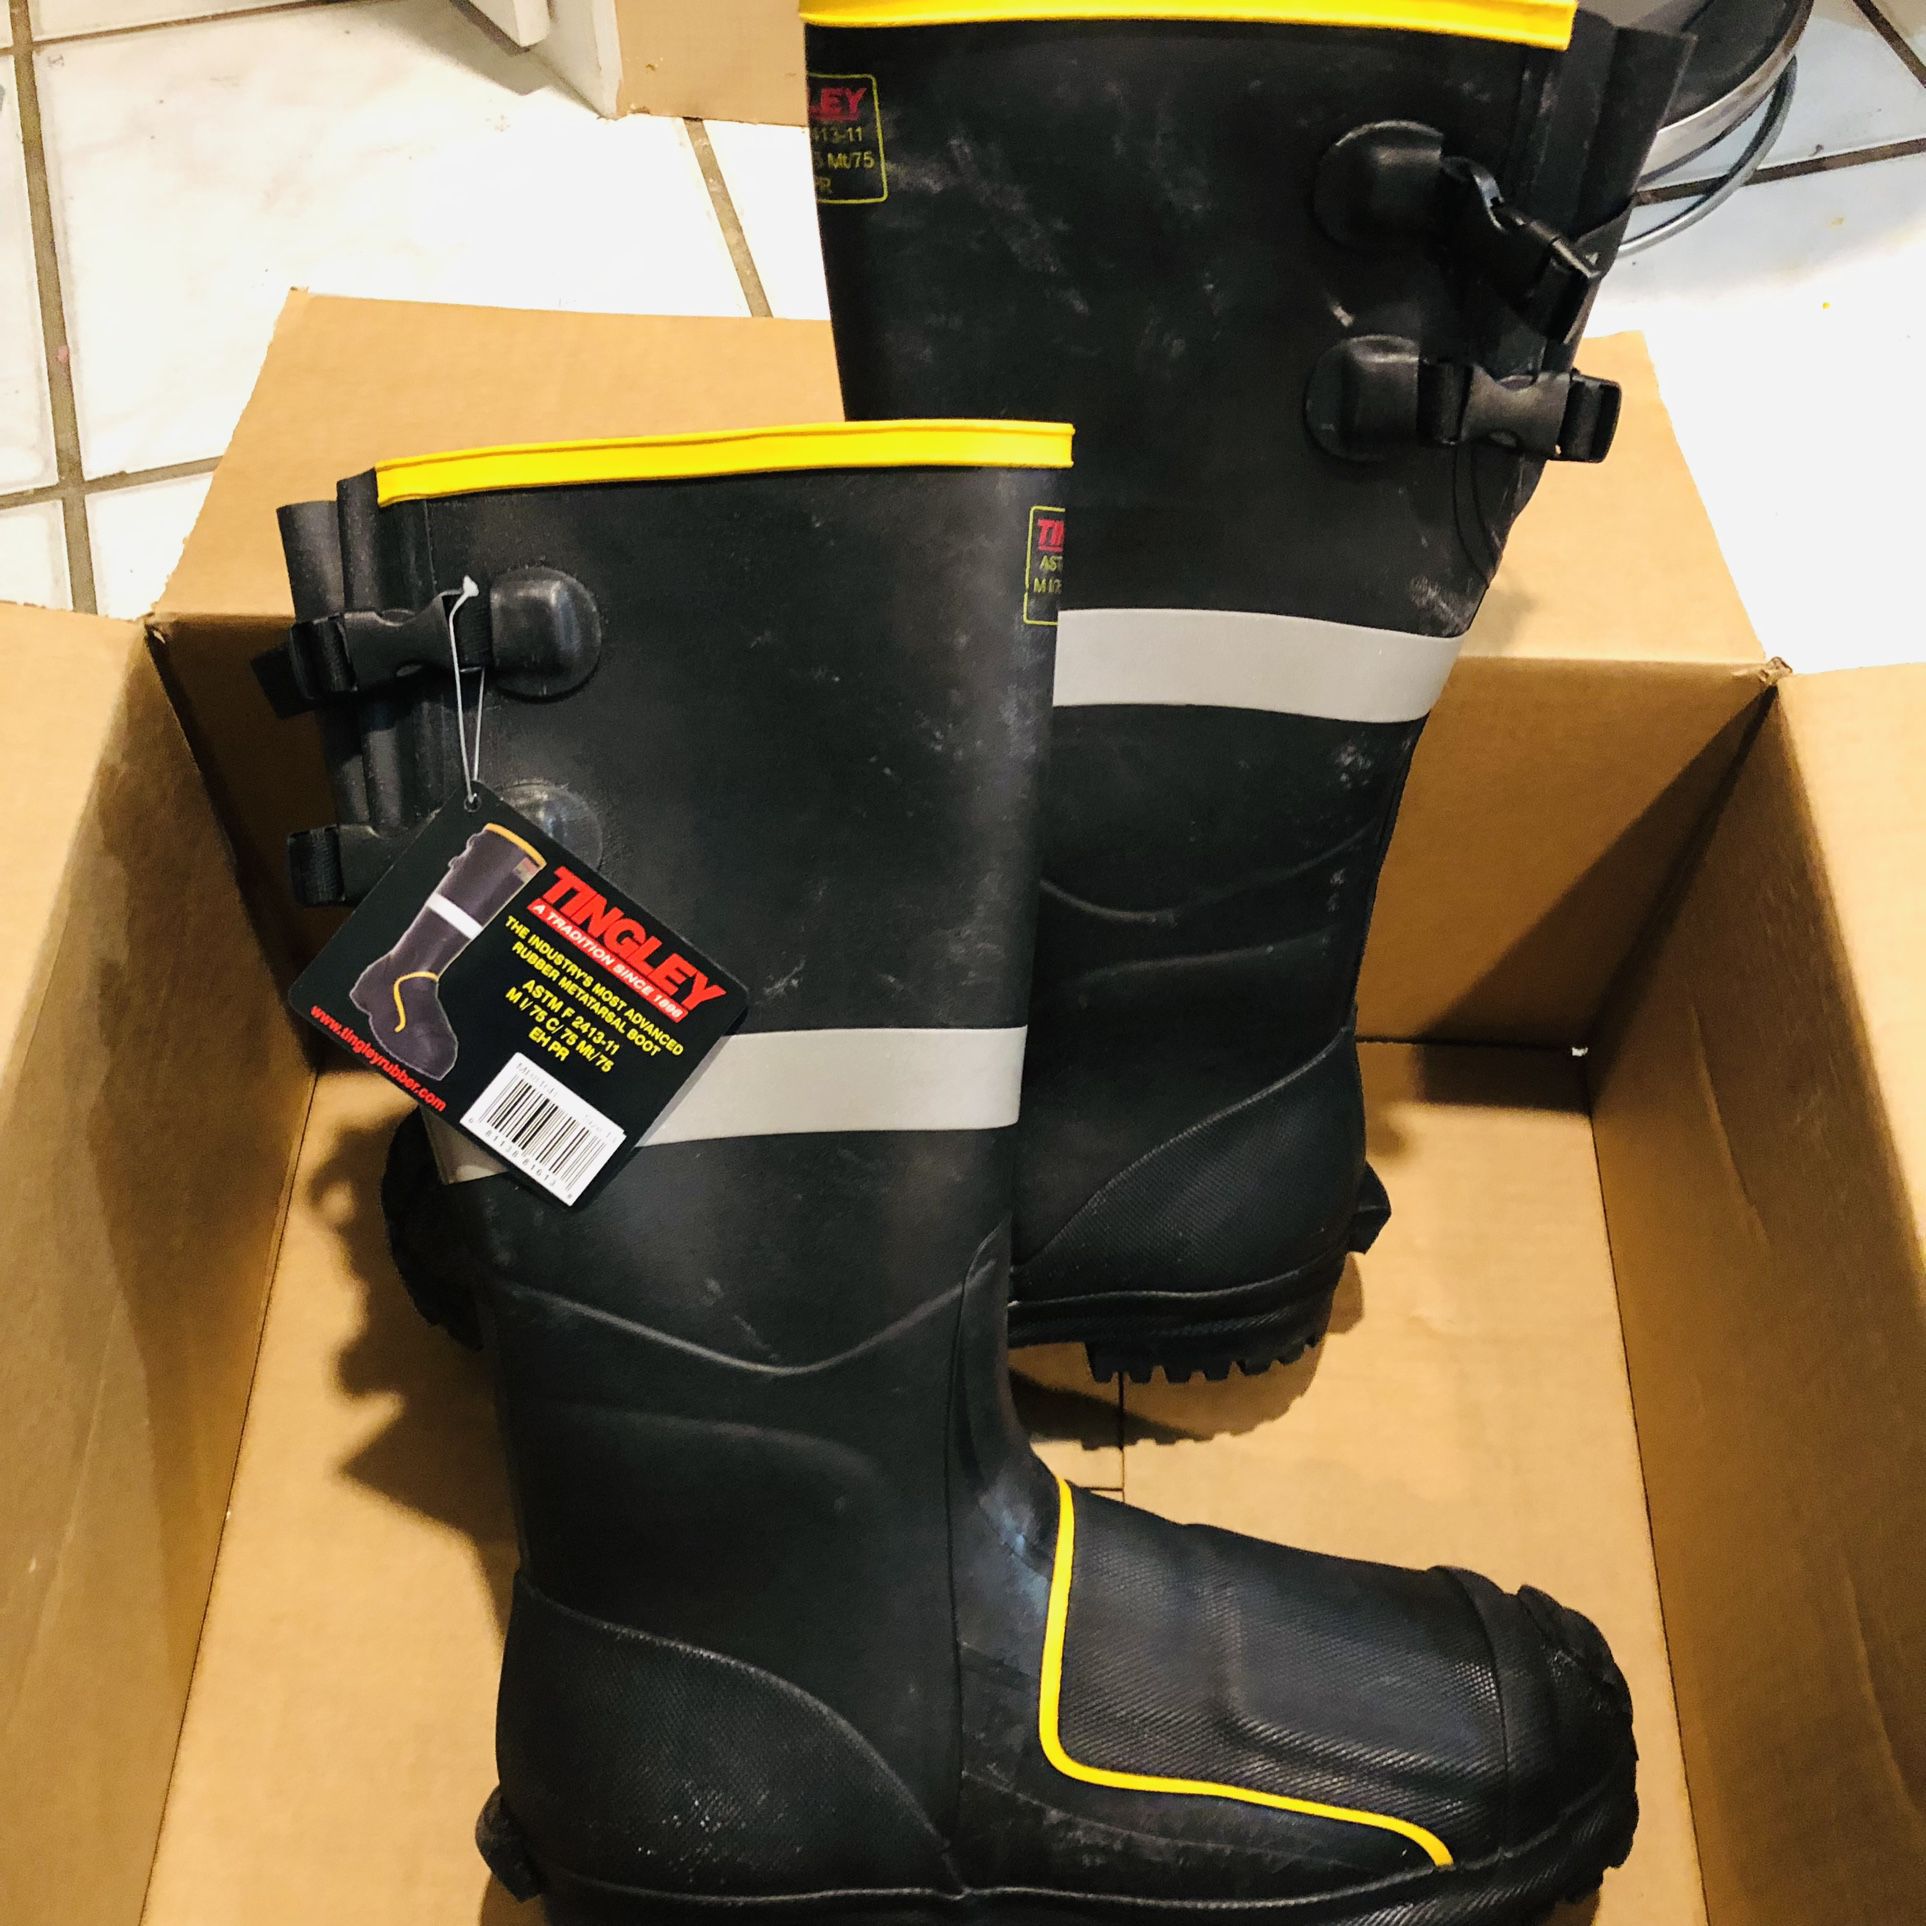 *NEW IN BOX* TINGLEY Men’s Professional All Hazards Rubber Boot Knee Steel Toe Type MB816B Size13 